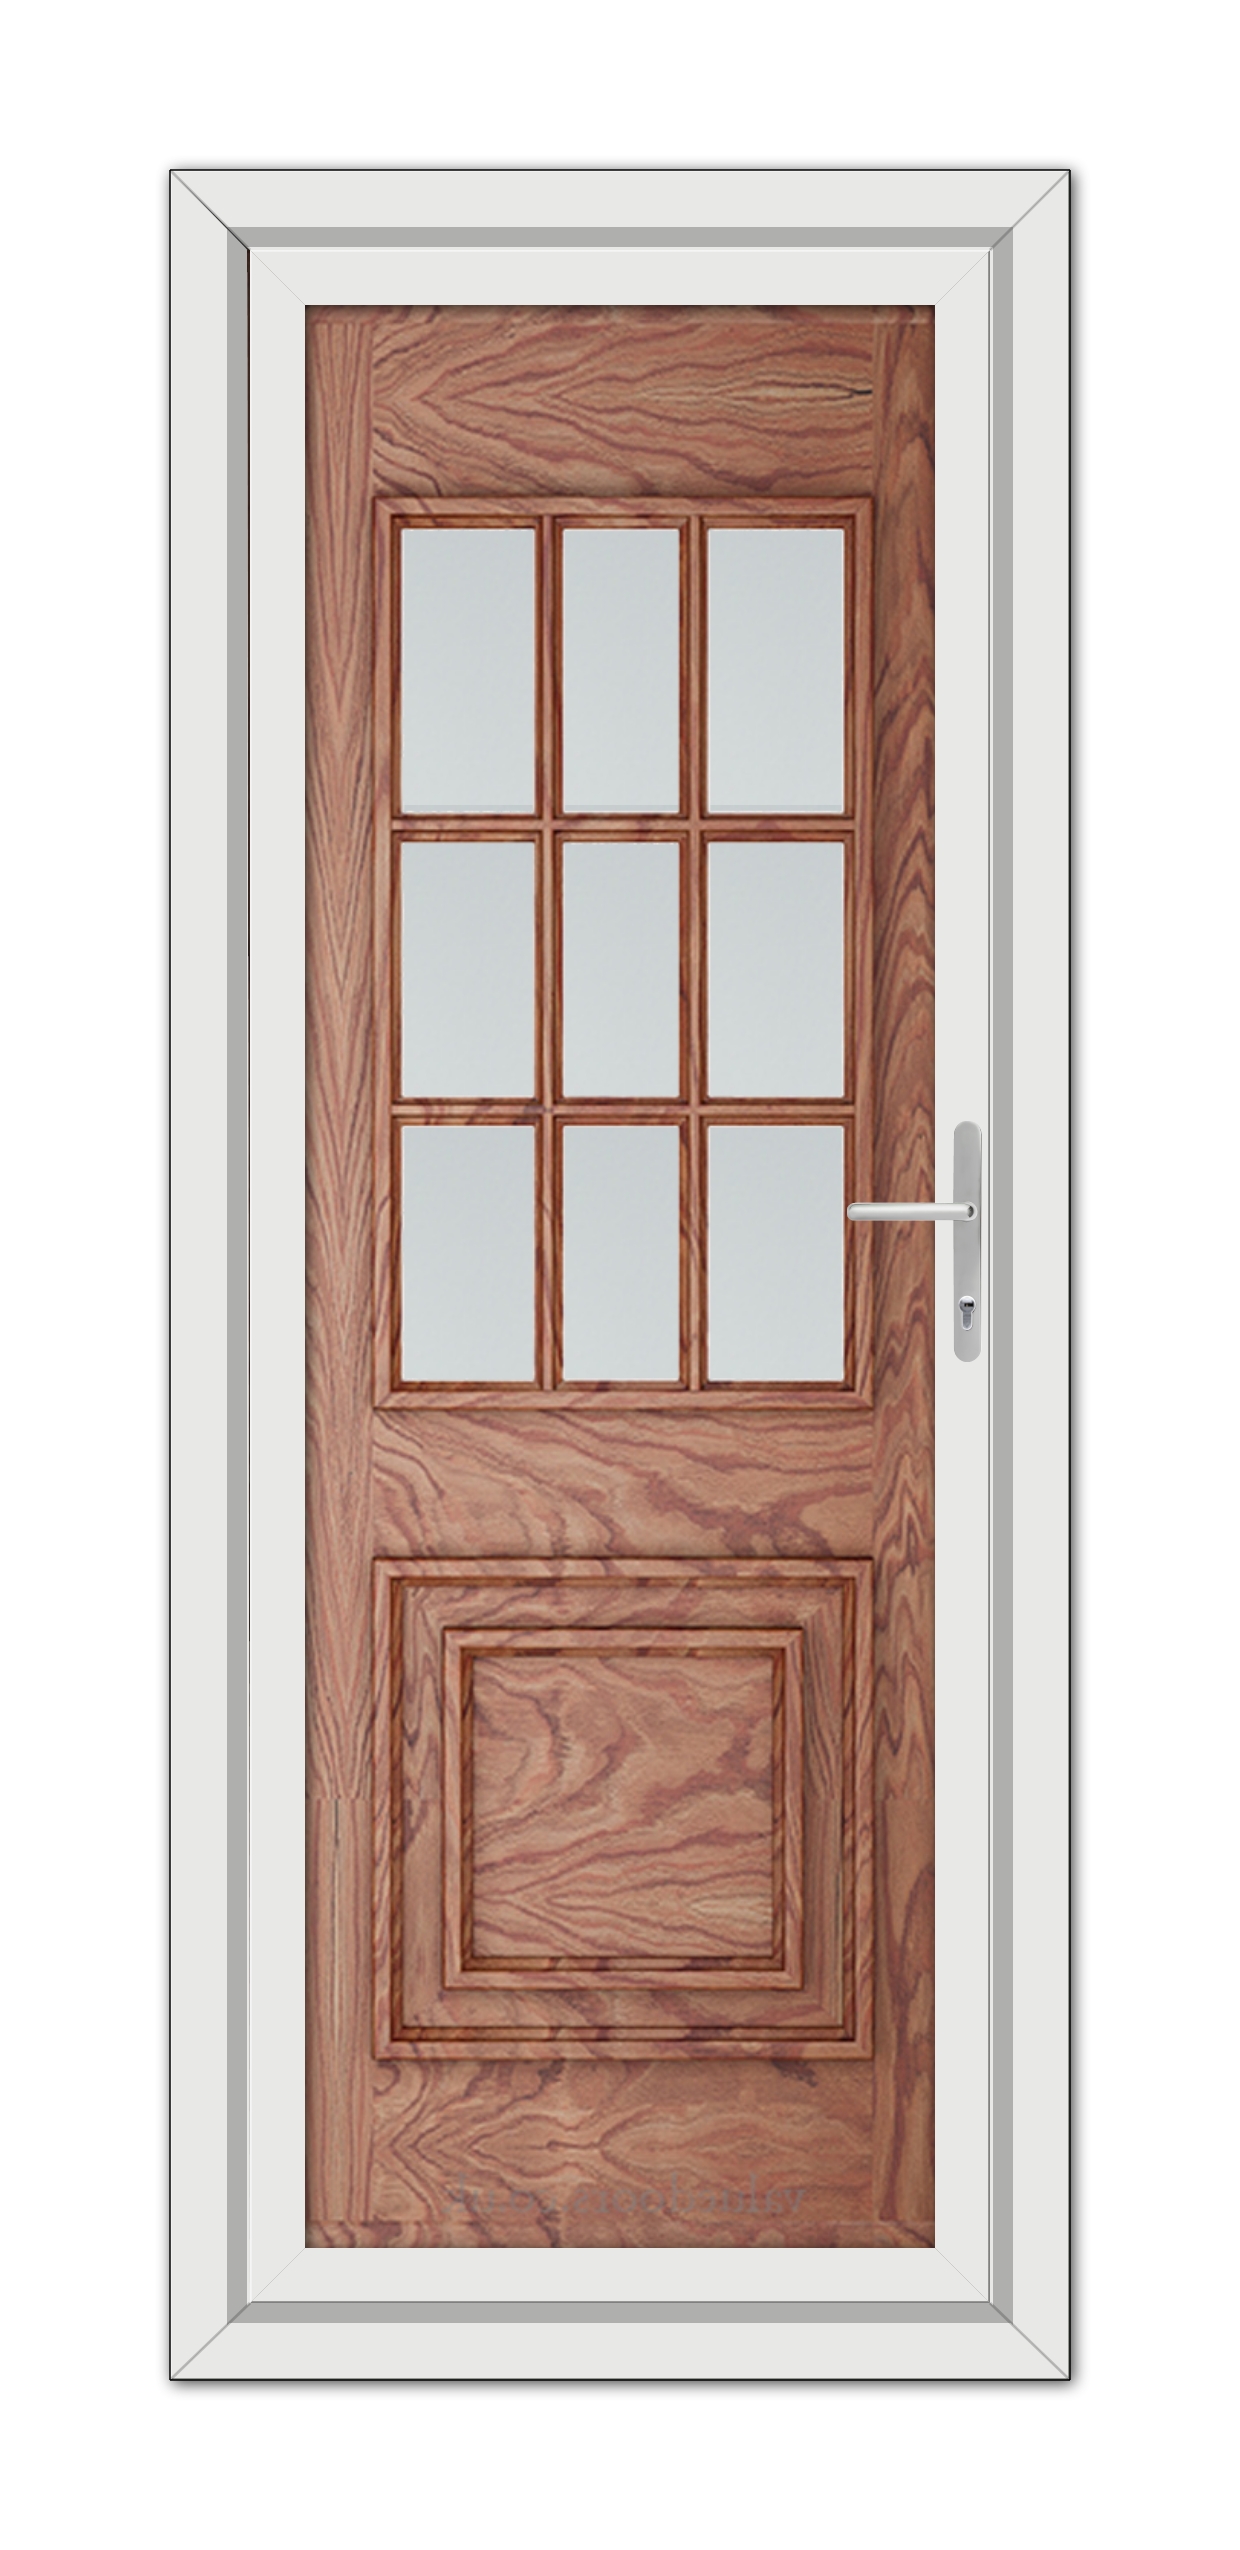 Solid Oak Cambridge One uPVC Door with glass panels in the upper half, framed by a white casing, and equipped with a metal handle.